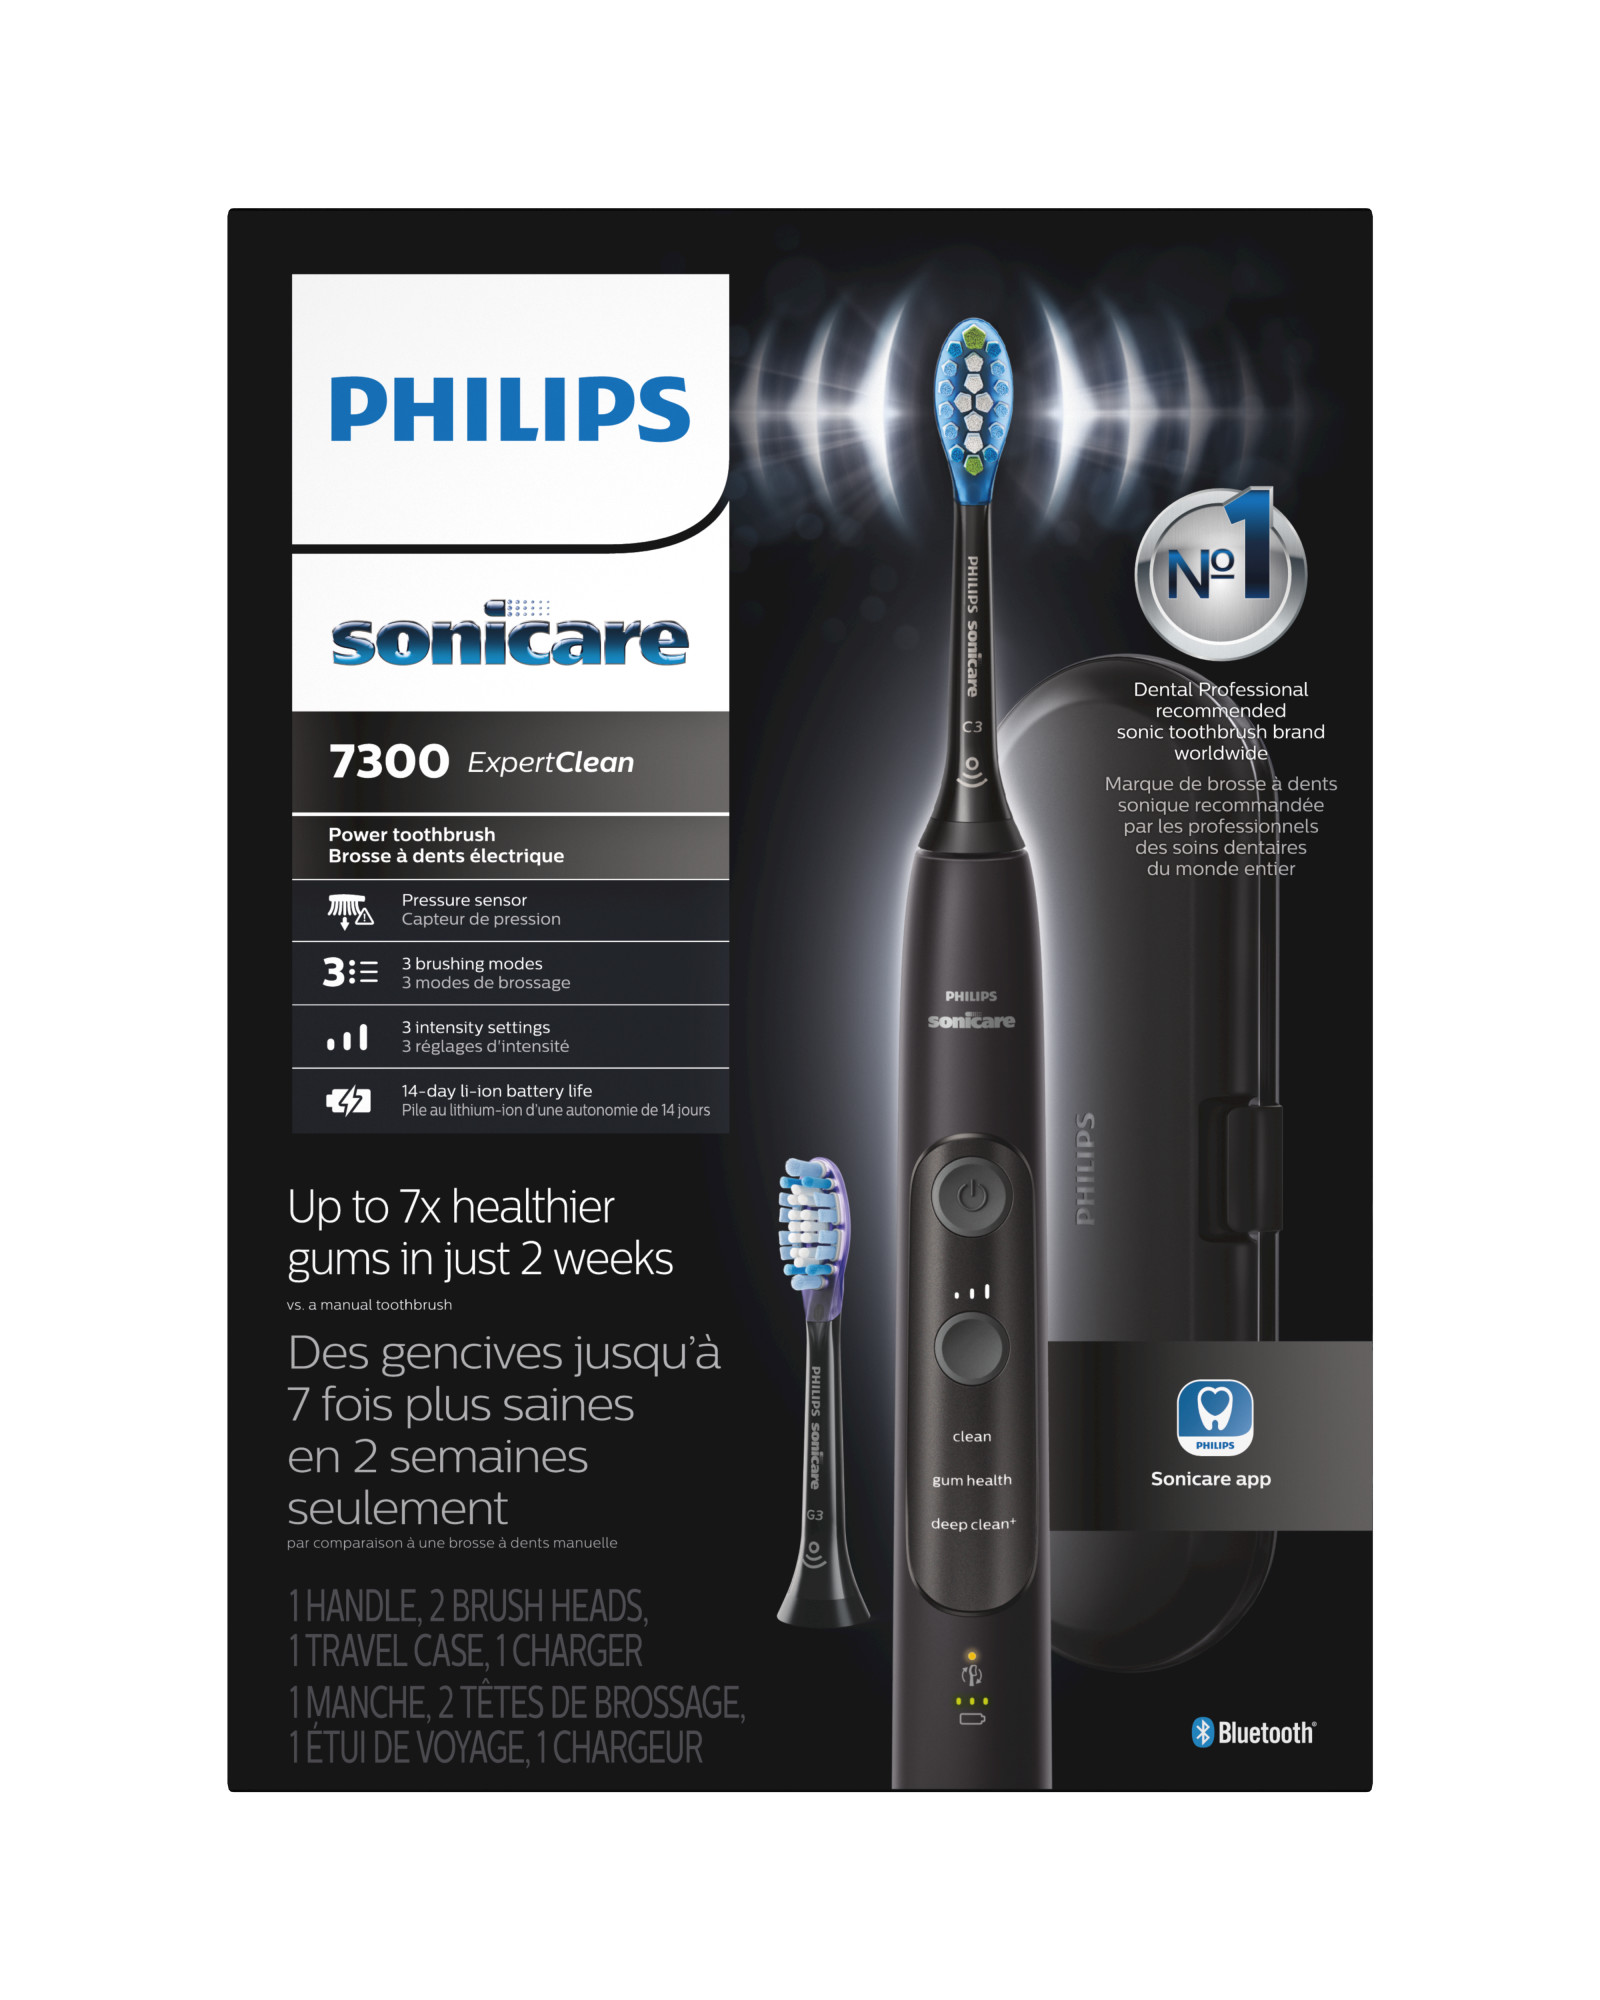 Philips Sonicare ExpertClean 7300, Rechargeable Electric Toothbrush, Black HX9610/17 - image 18 of 19